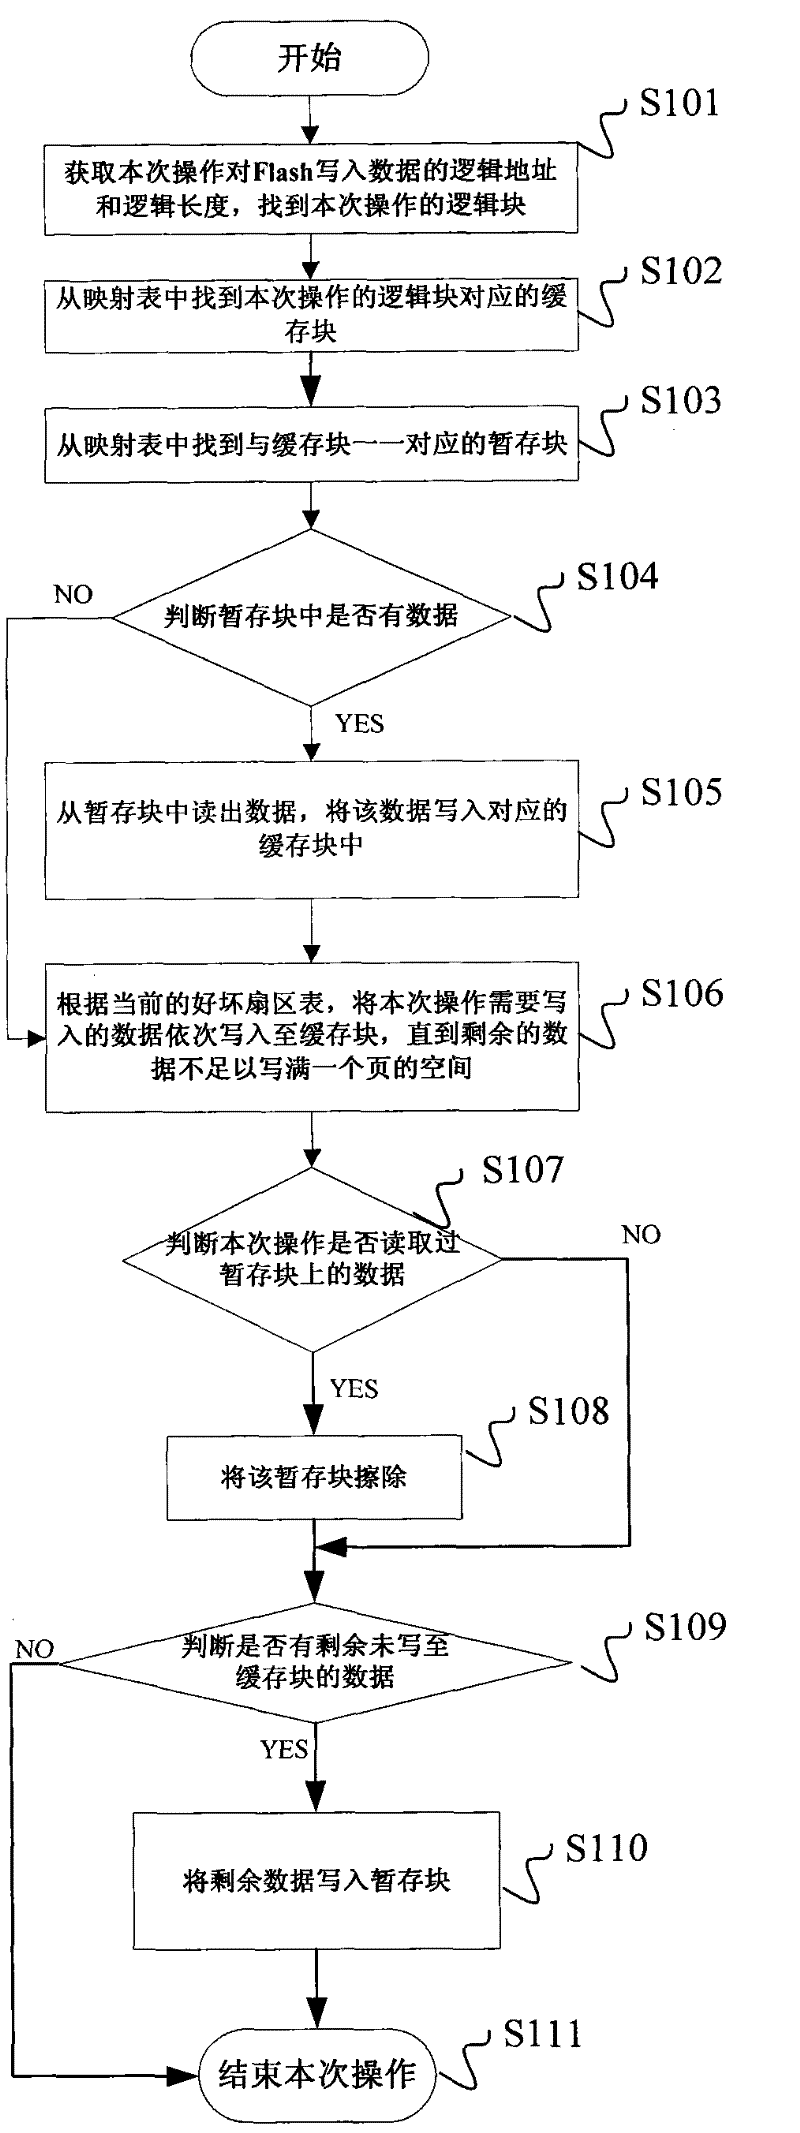 Method and system for flash memory write-in under sector mode